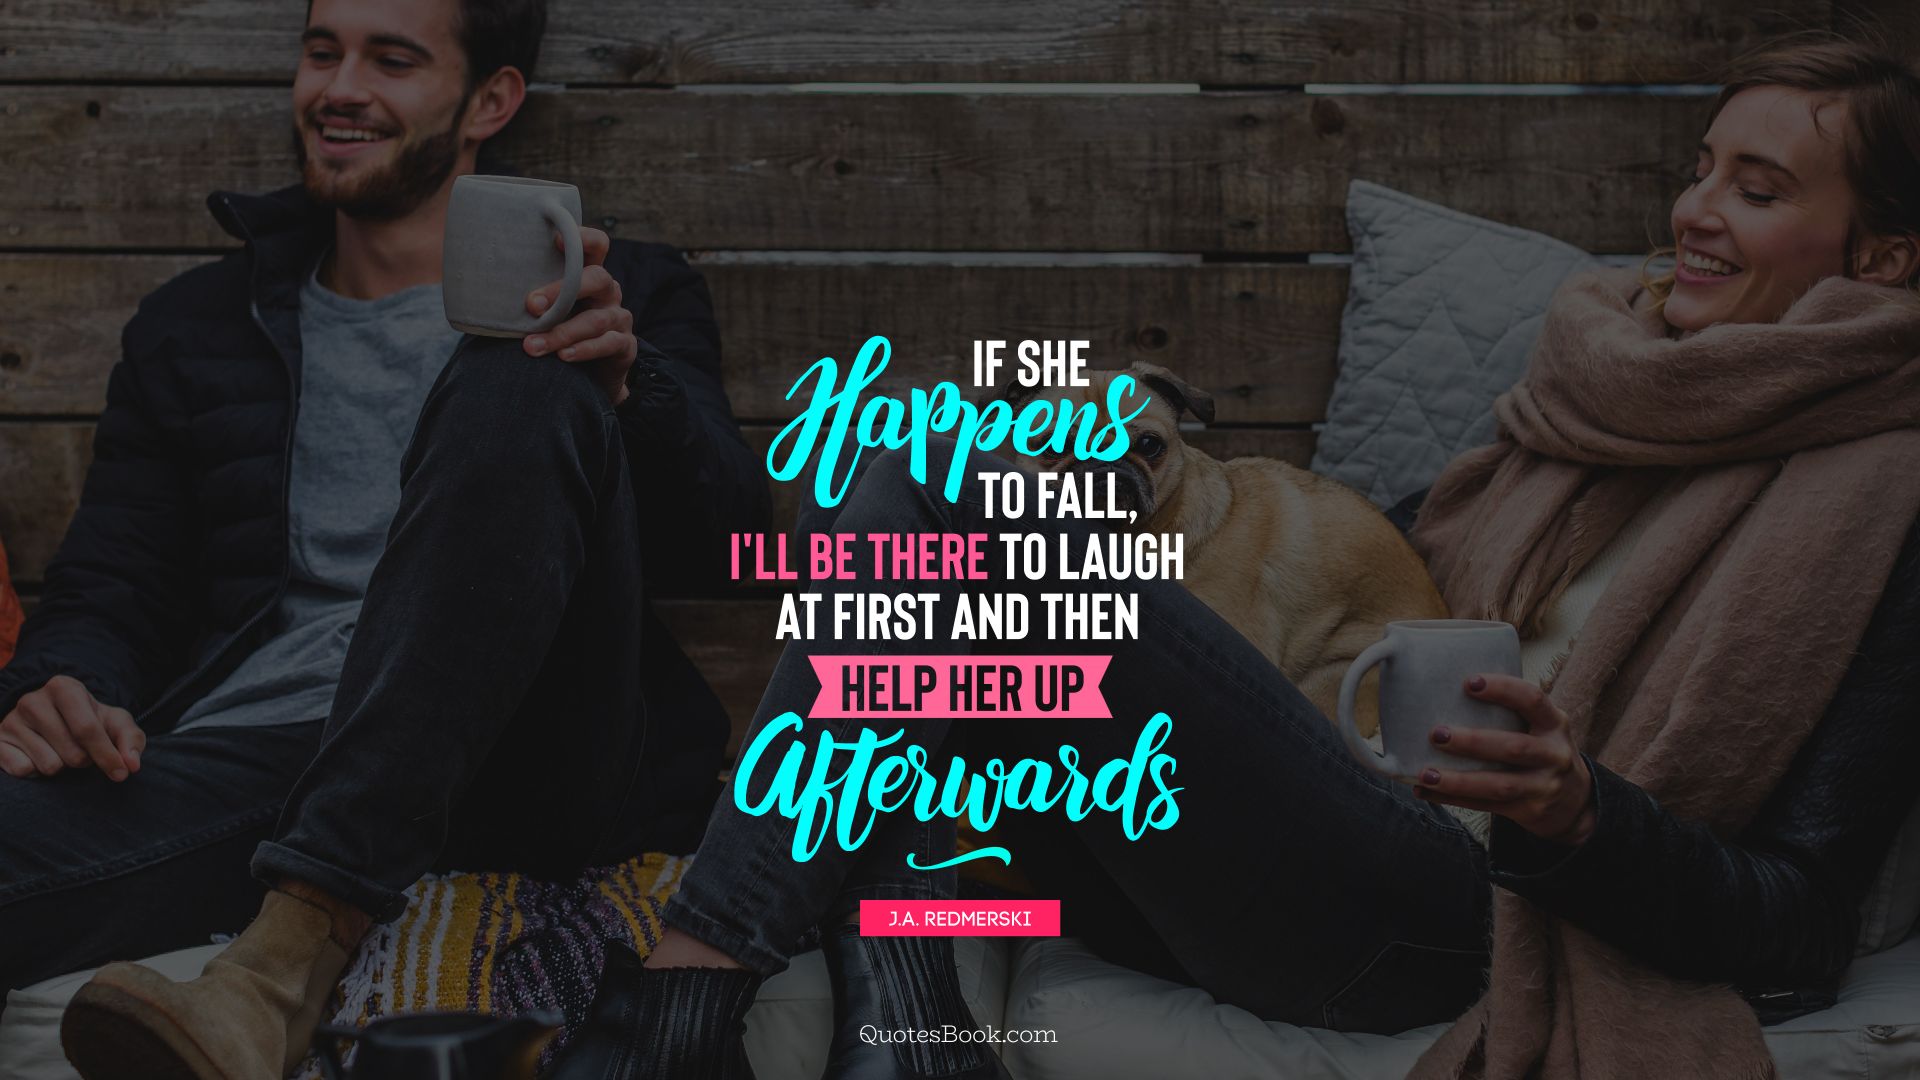 If she happens to fall, I'll be there to laugh at first and then help her up afterwards. - Quote by J.A. Redmerski